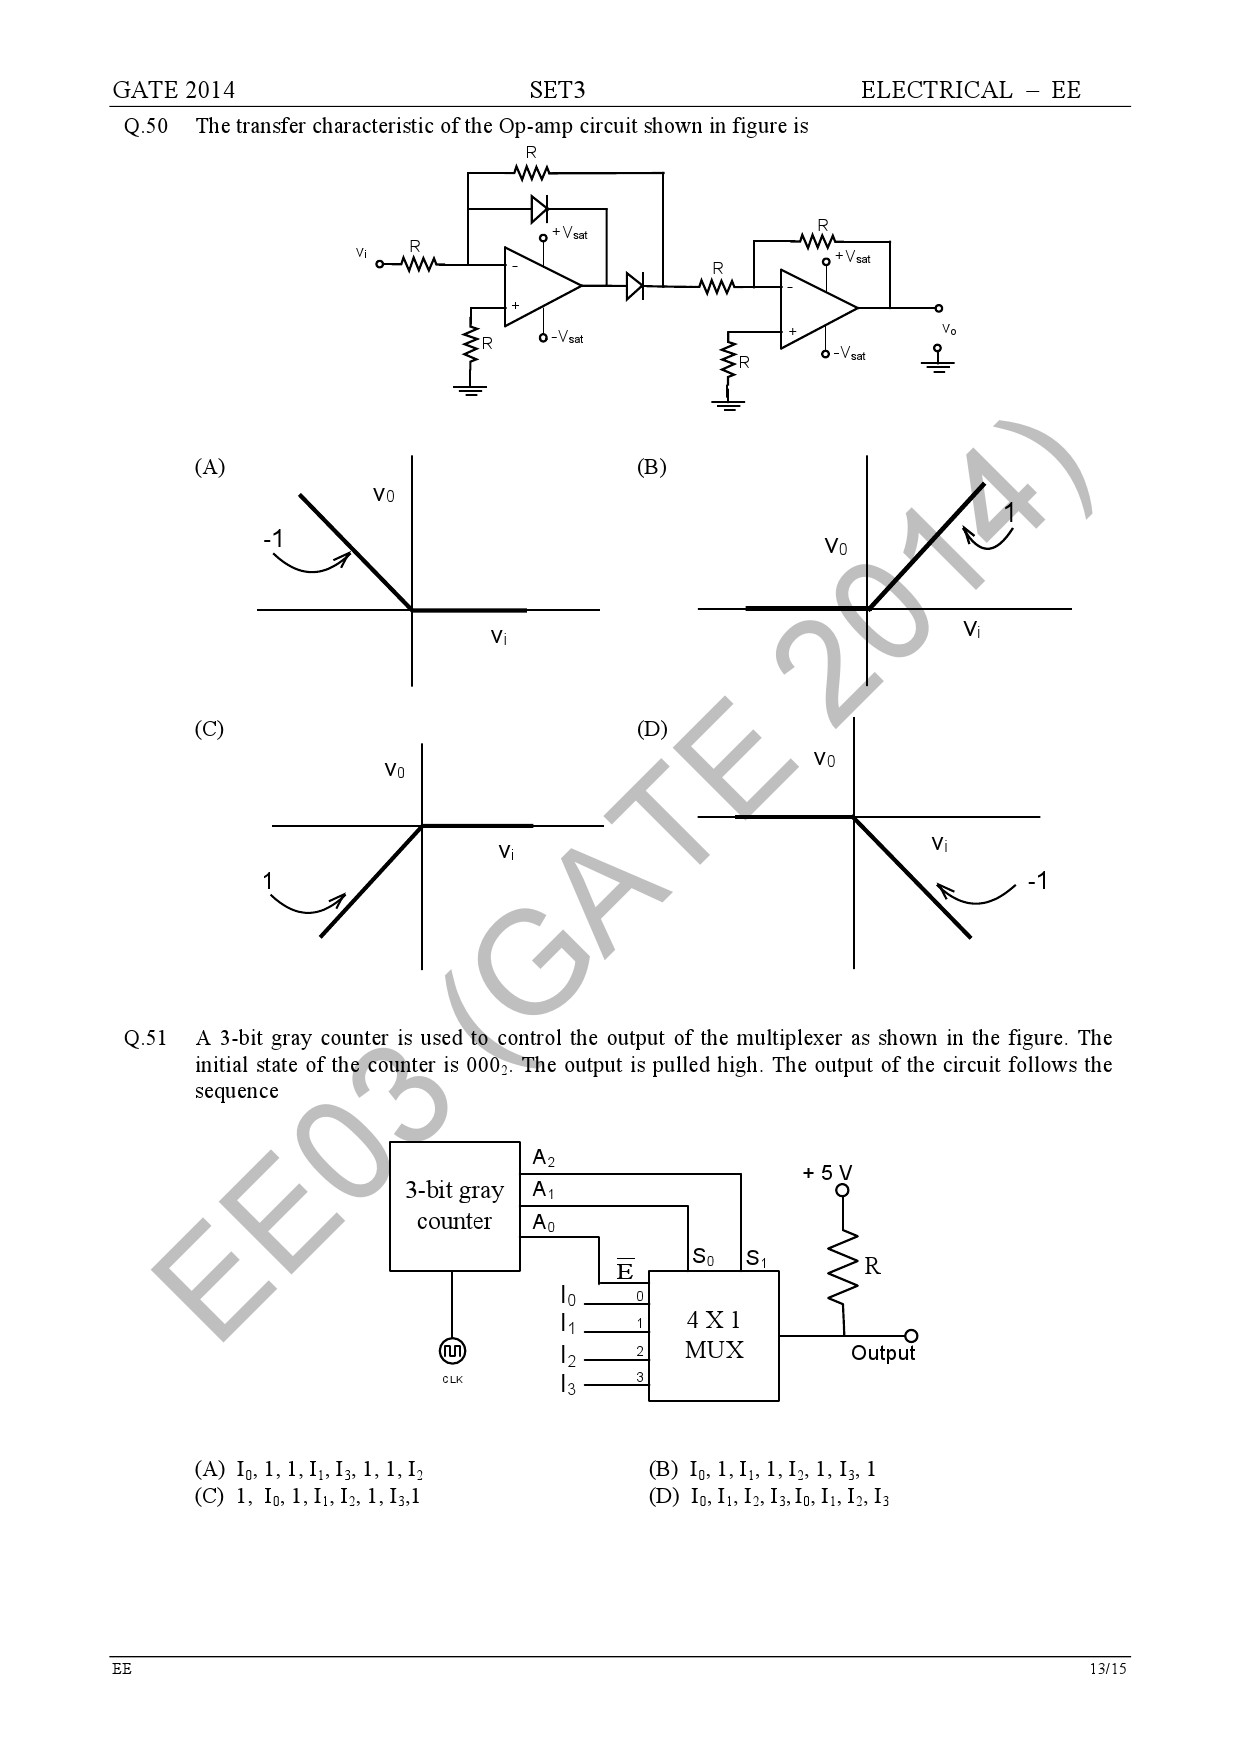 GATE Exam Question Paper 2014 Electrical Engineering Set 3 19